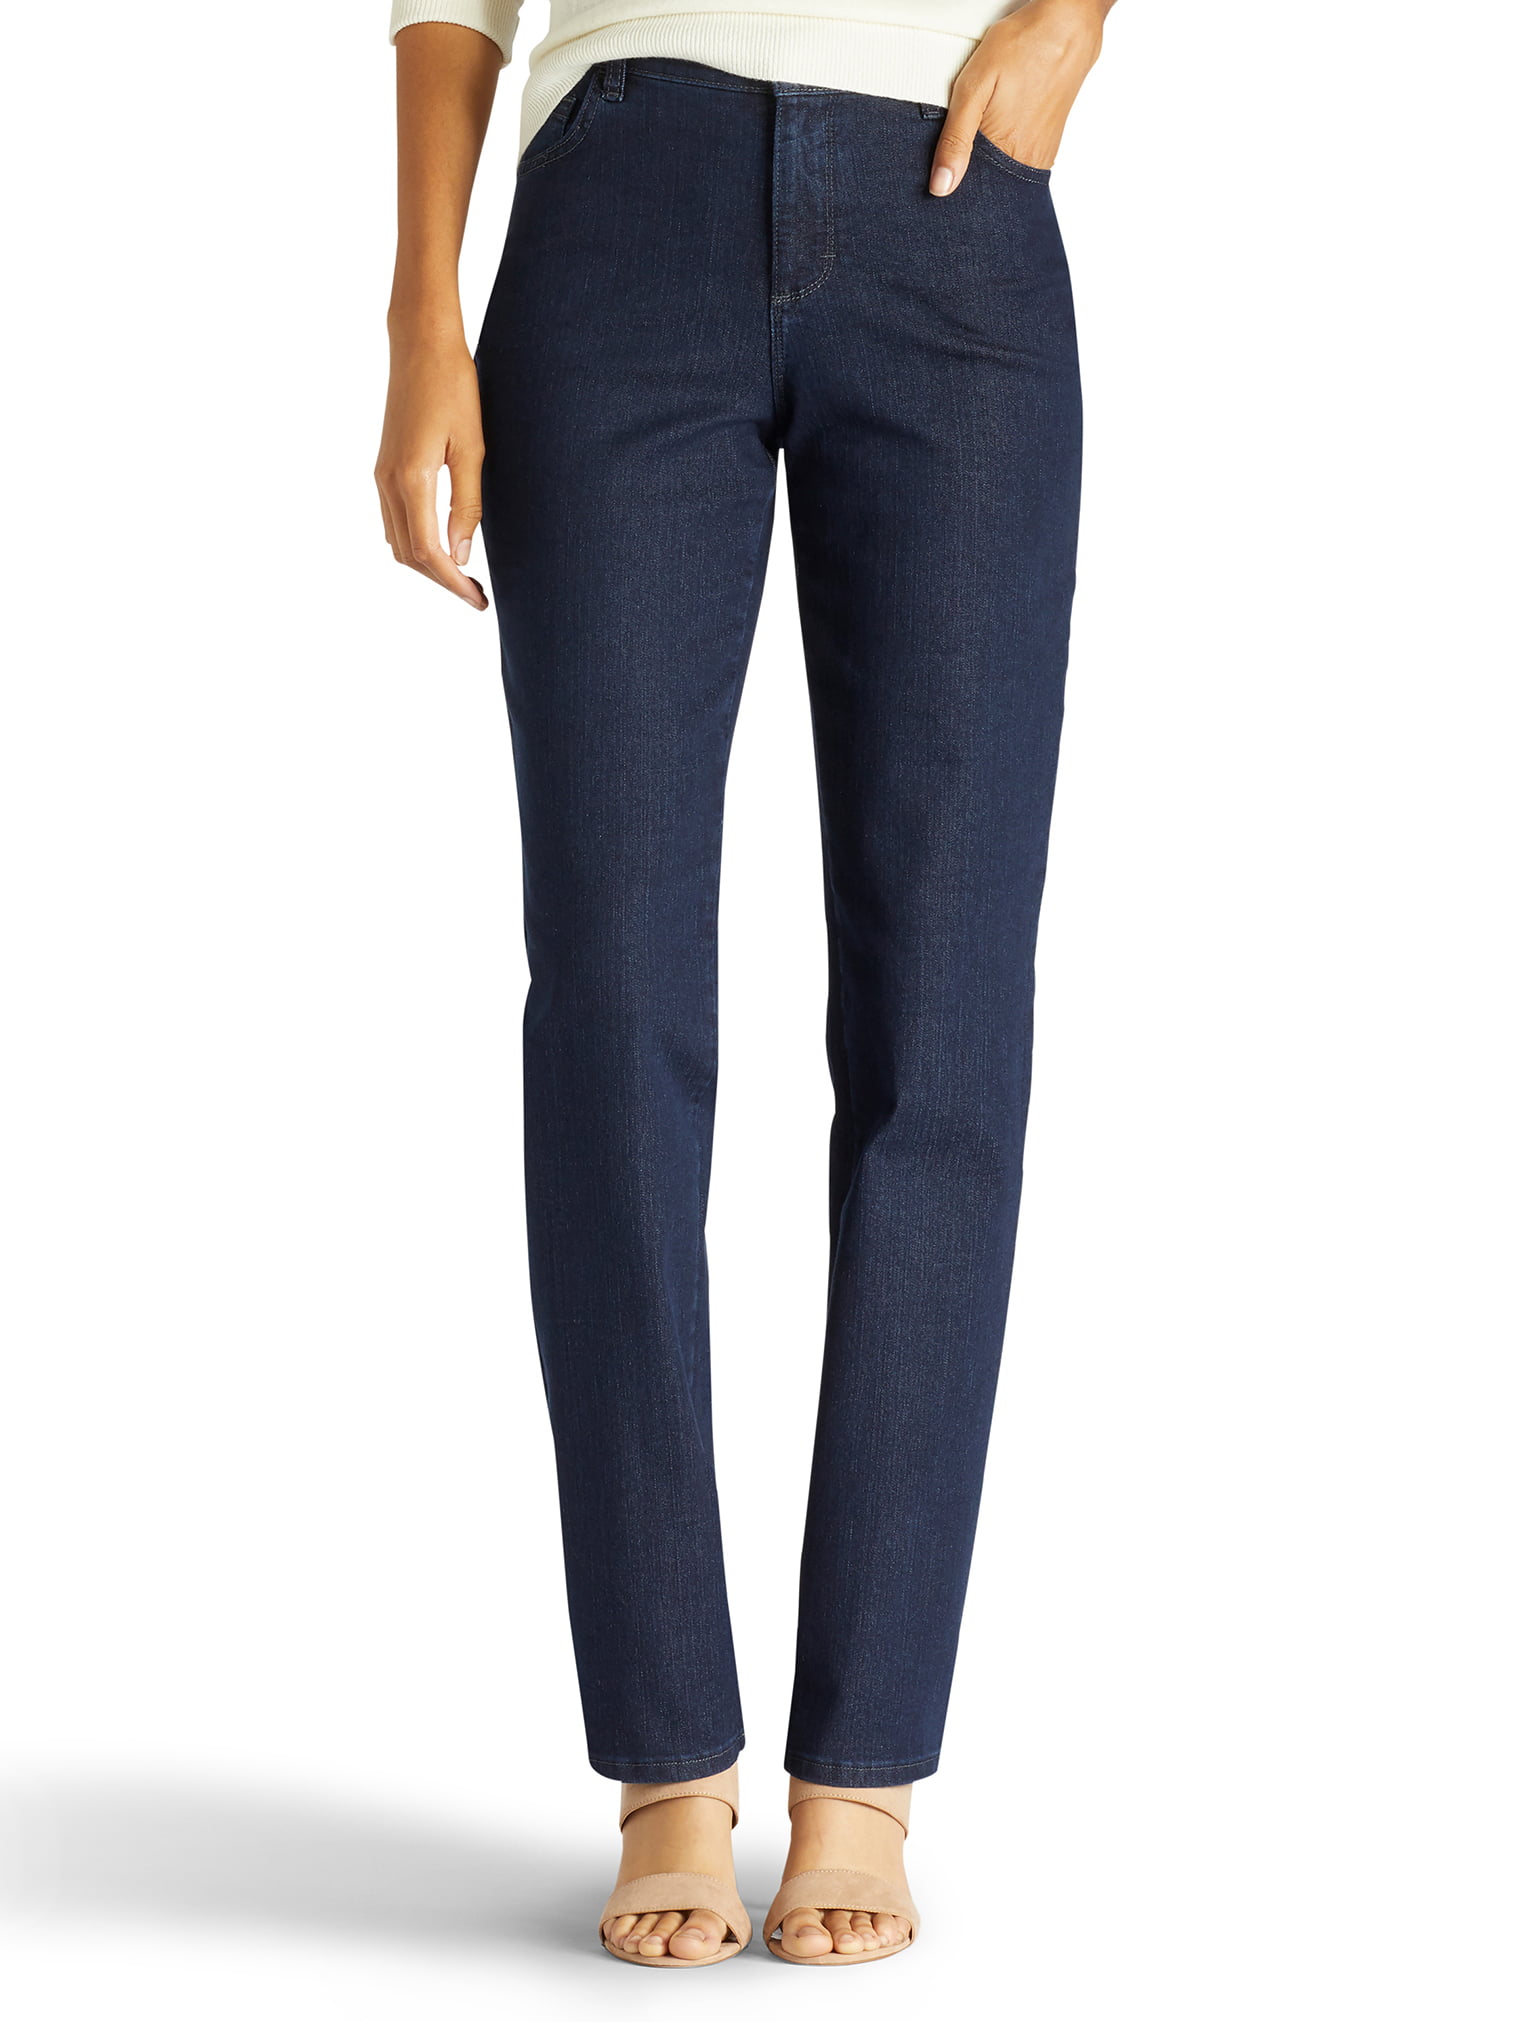 lee women's petite relaxed fit jeans